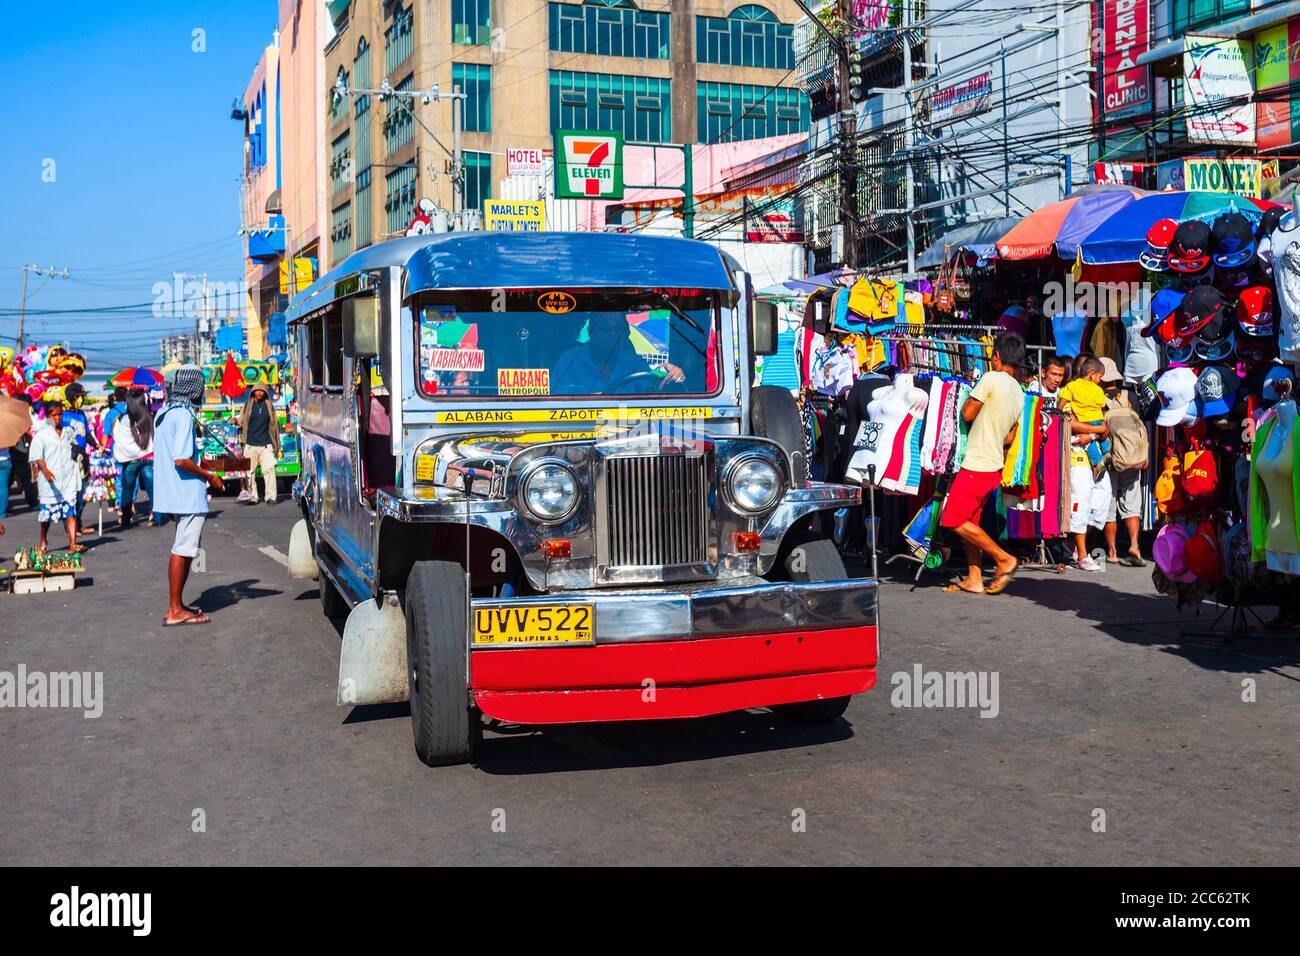 MANILA, PHILIPPINES - MARCH 17, 2013: Jeepneys are popular public transport in the Manila city in Philippines, they made from old US military jeeps Stock Photo